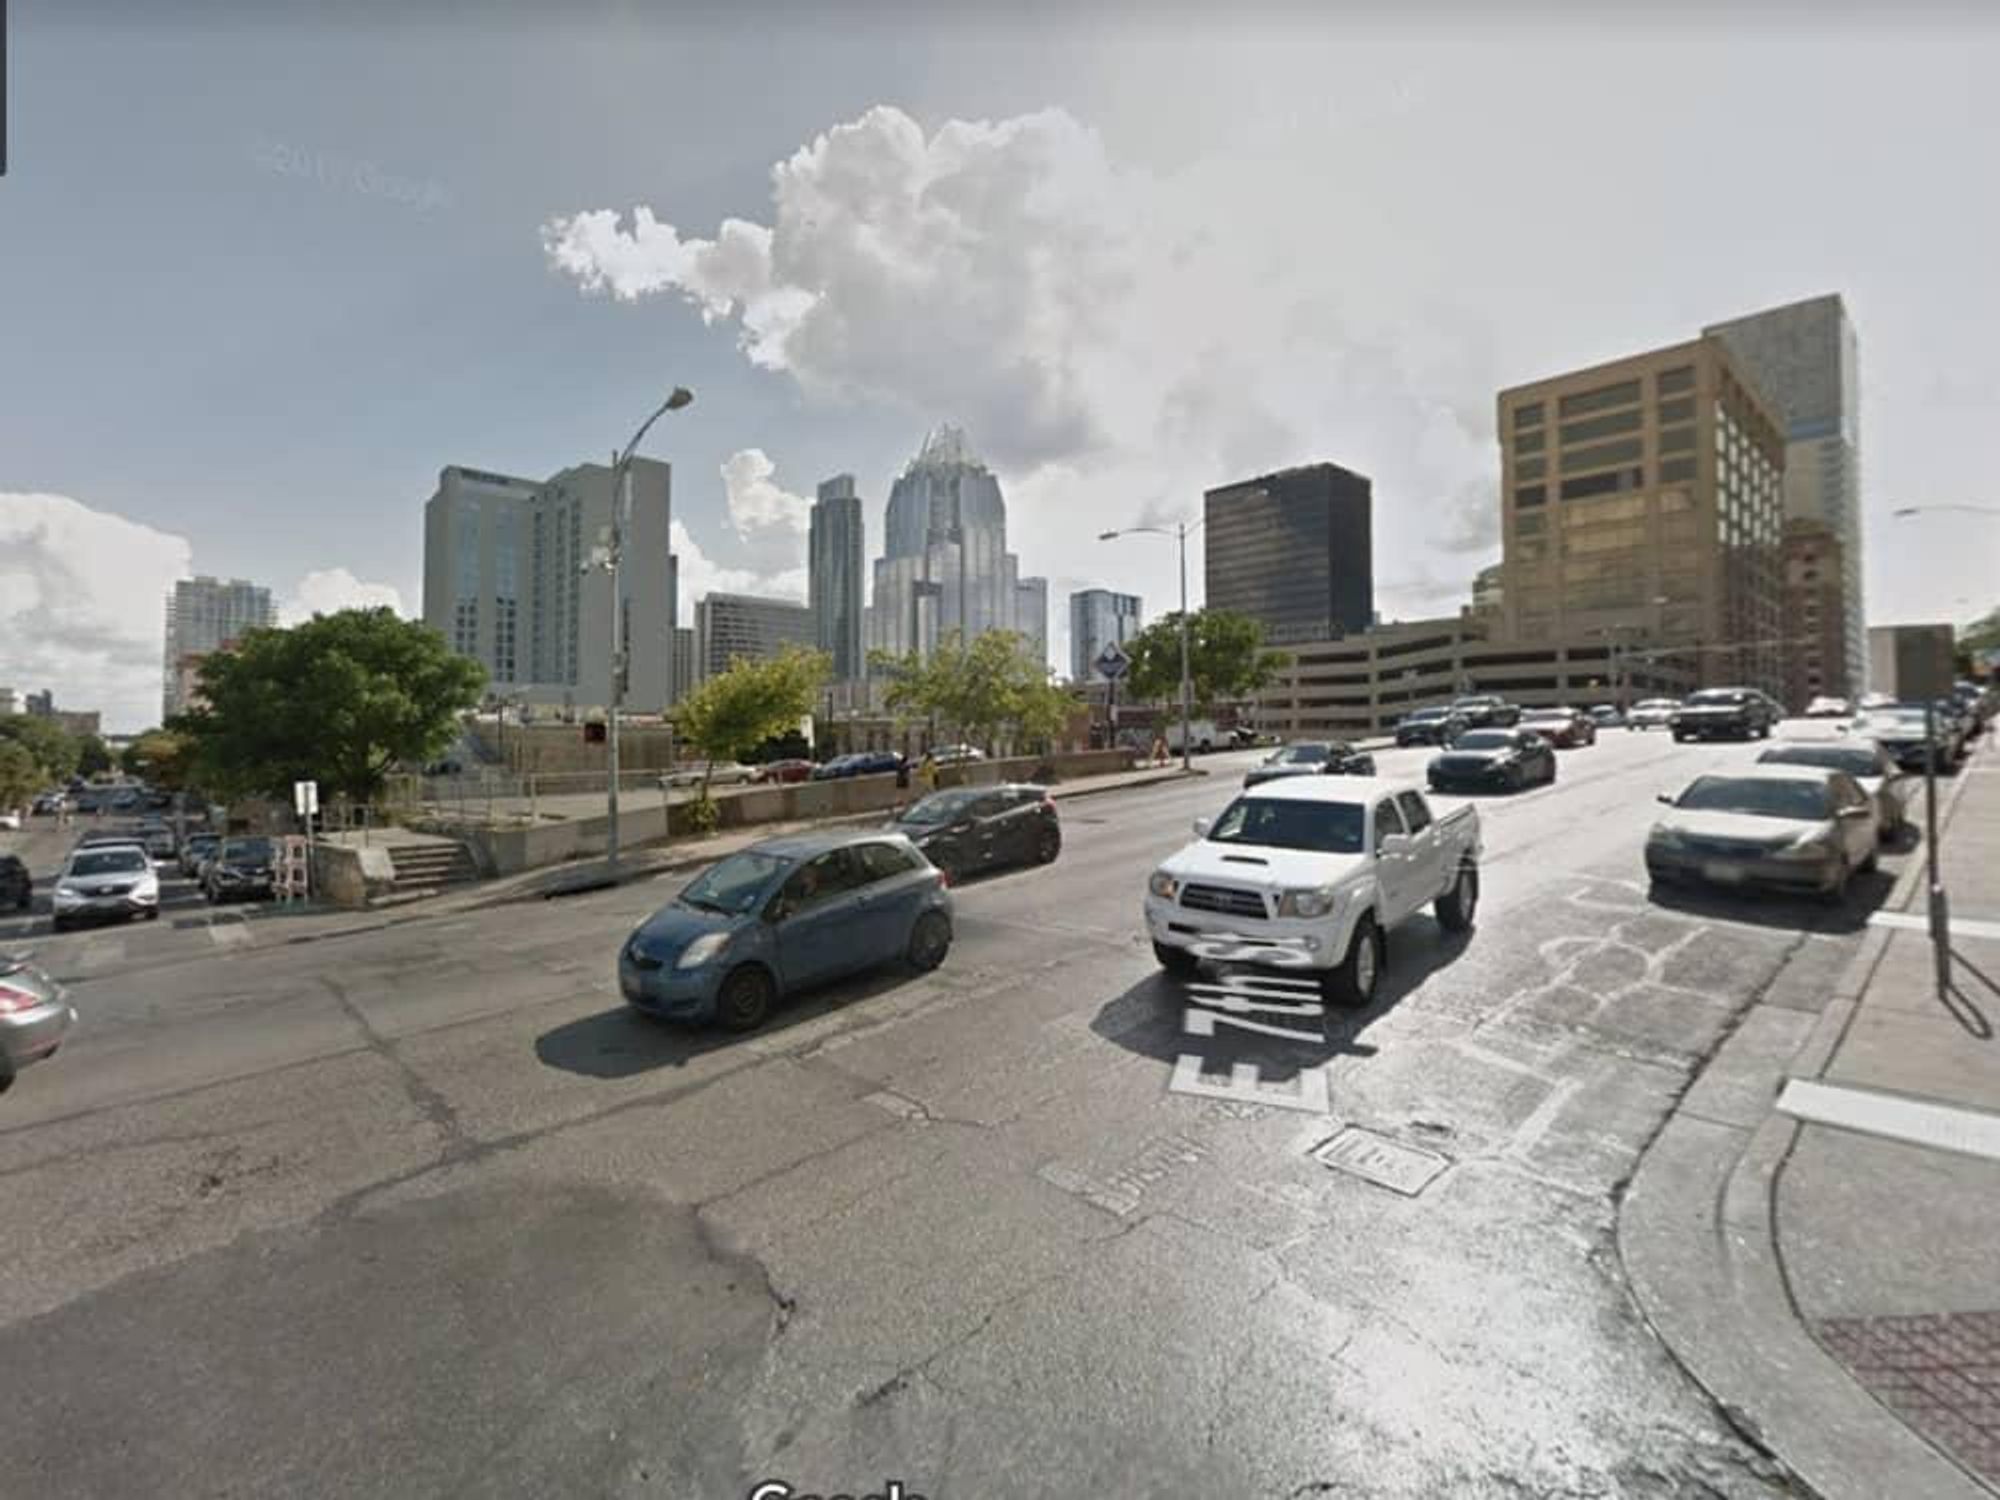 7th and trinity streets downtown austin